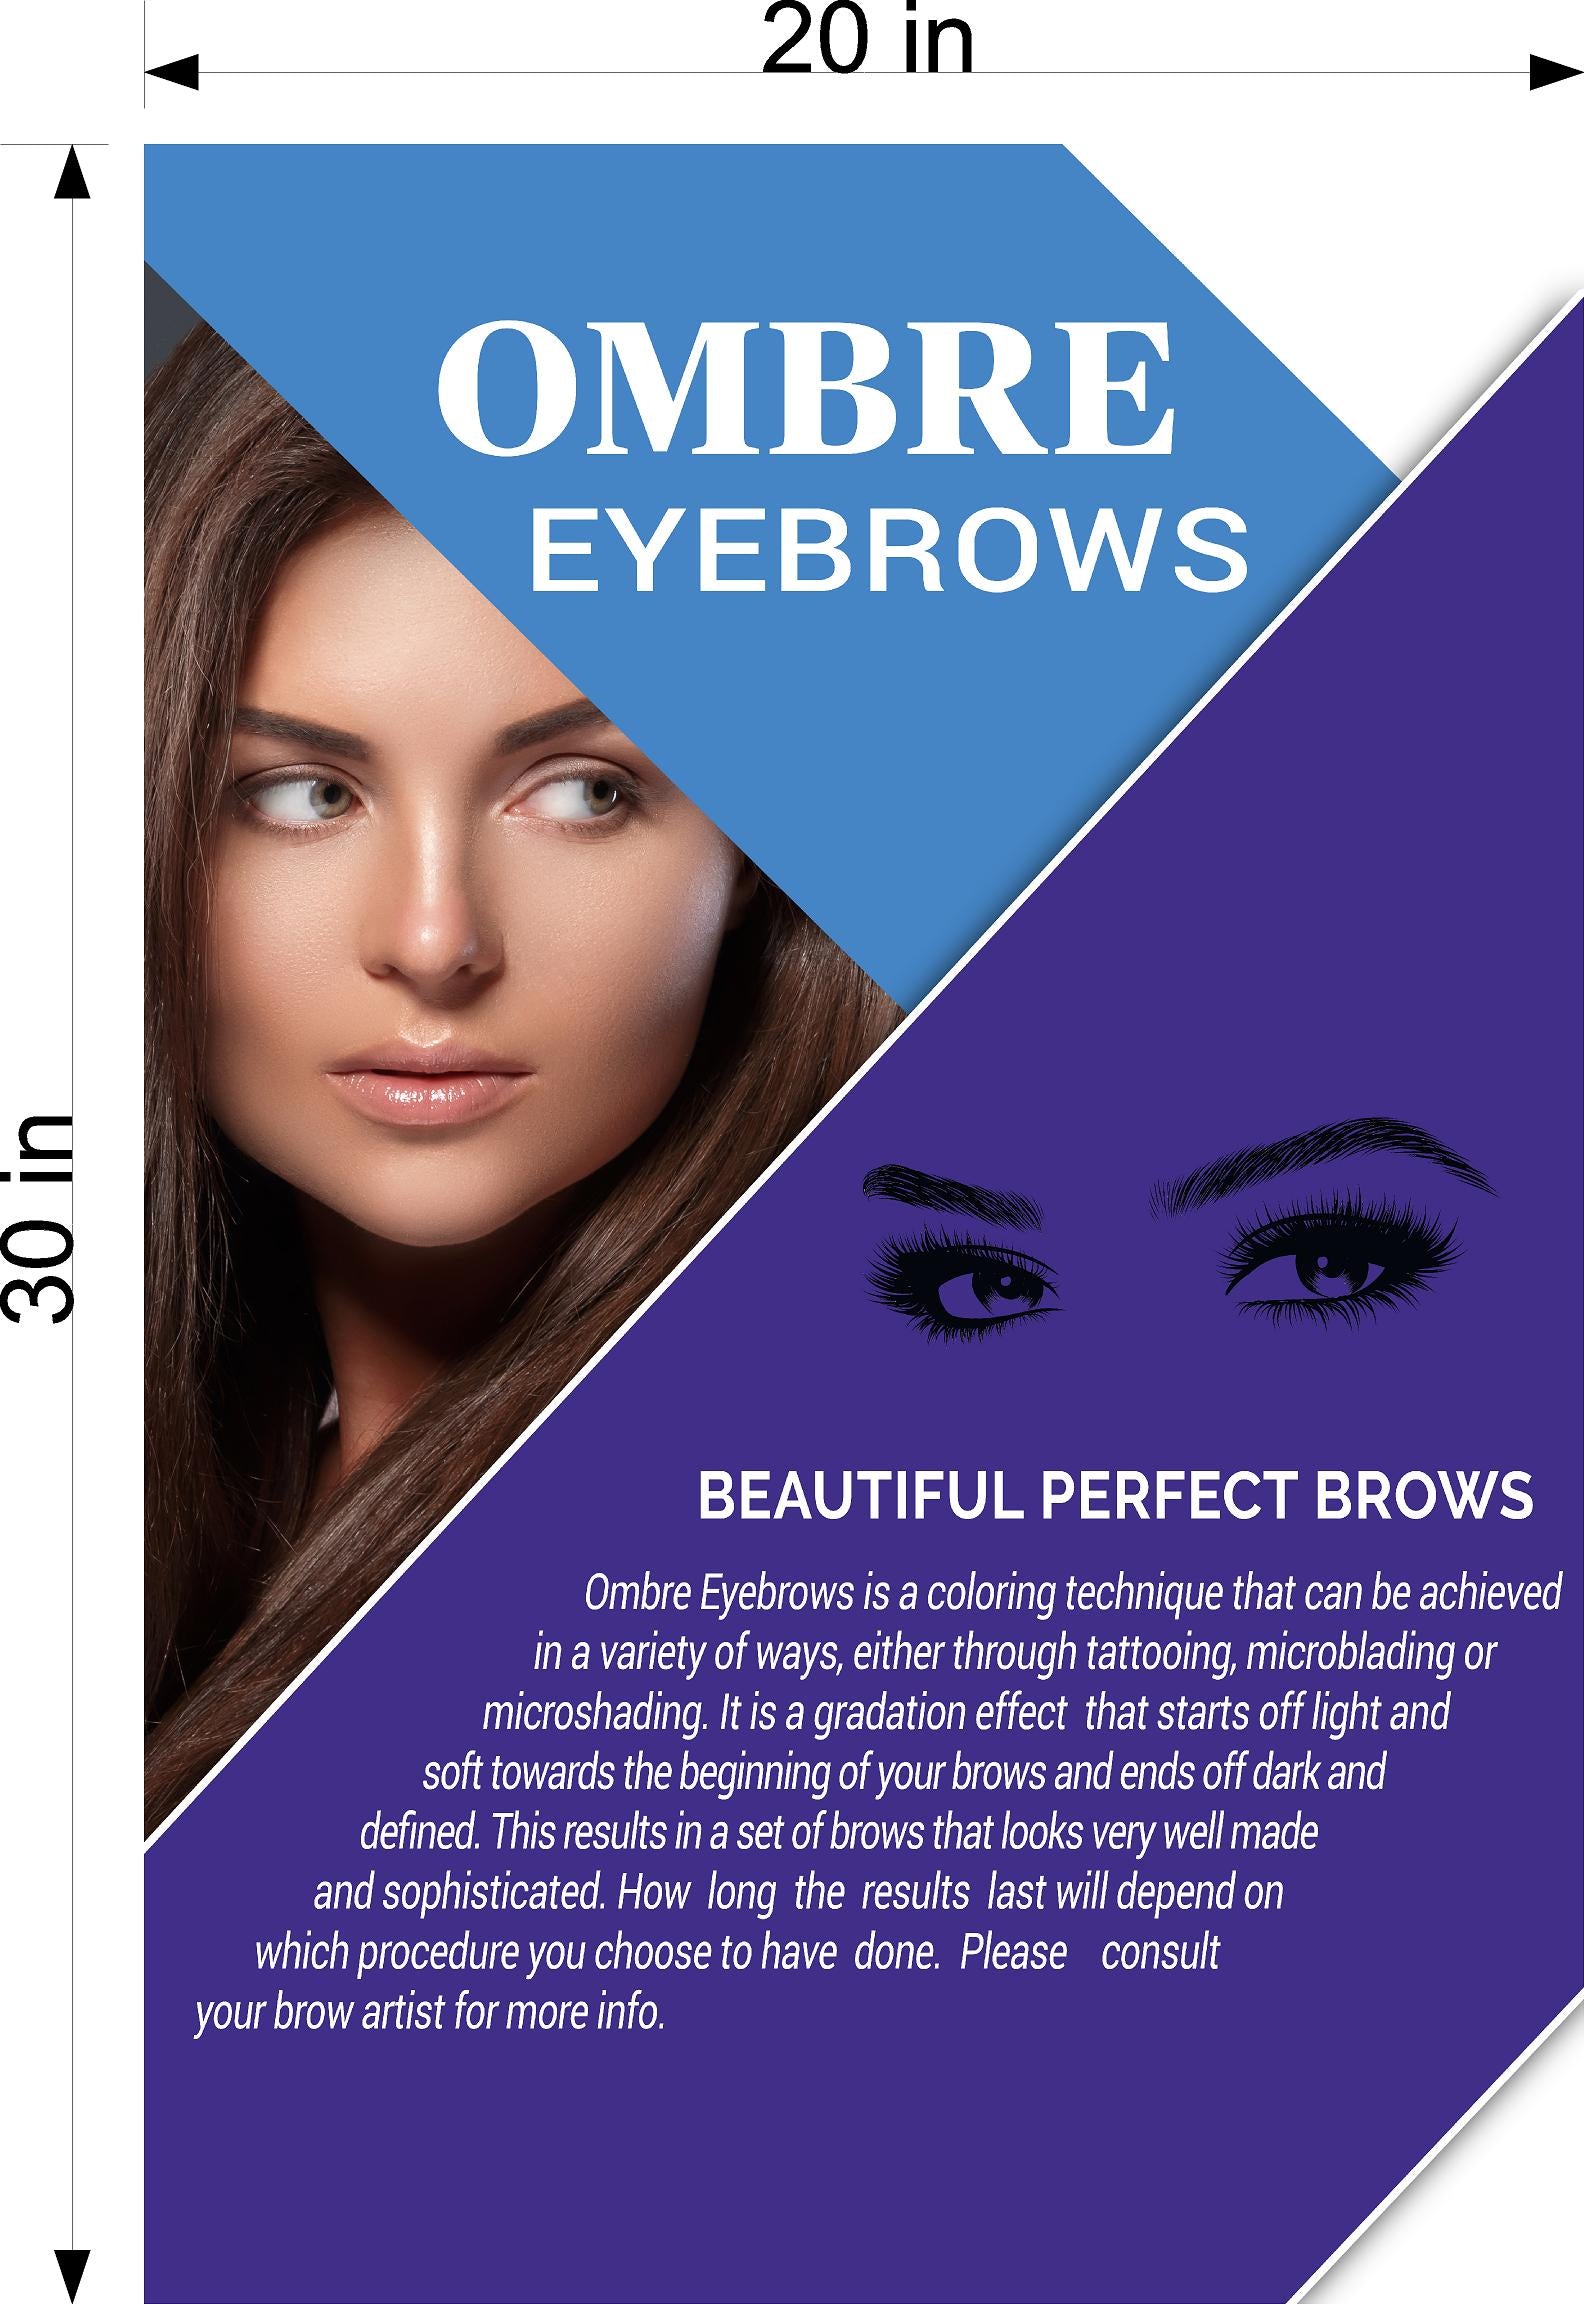 Ombre Eyebrows 06 Perforated Mesh One Way Vision See-Through Window Vinyl Salon Sign Powdered Brows Semi-permanent Vertical